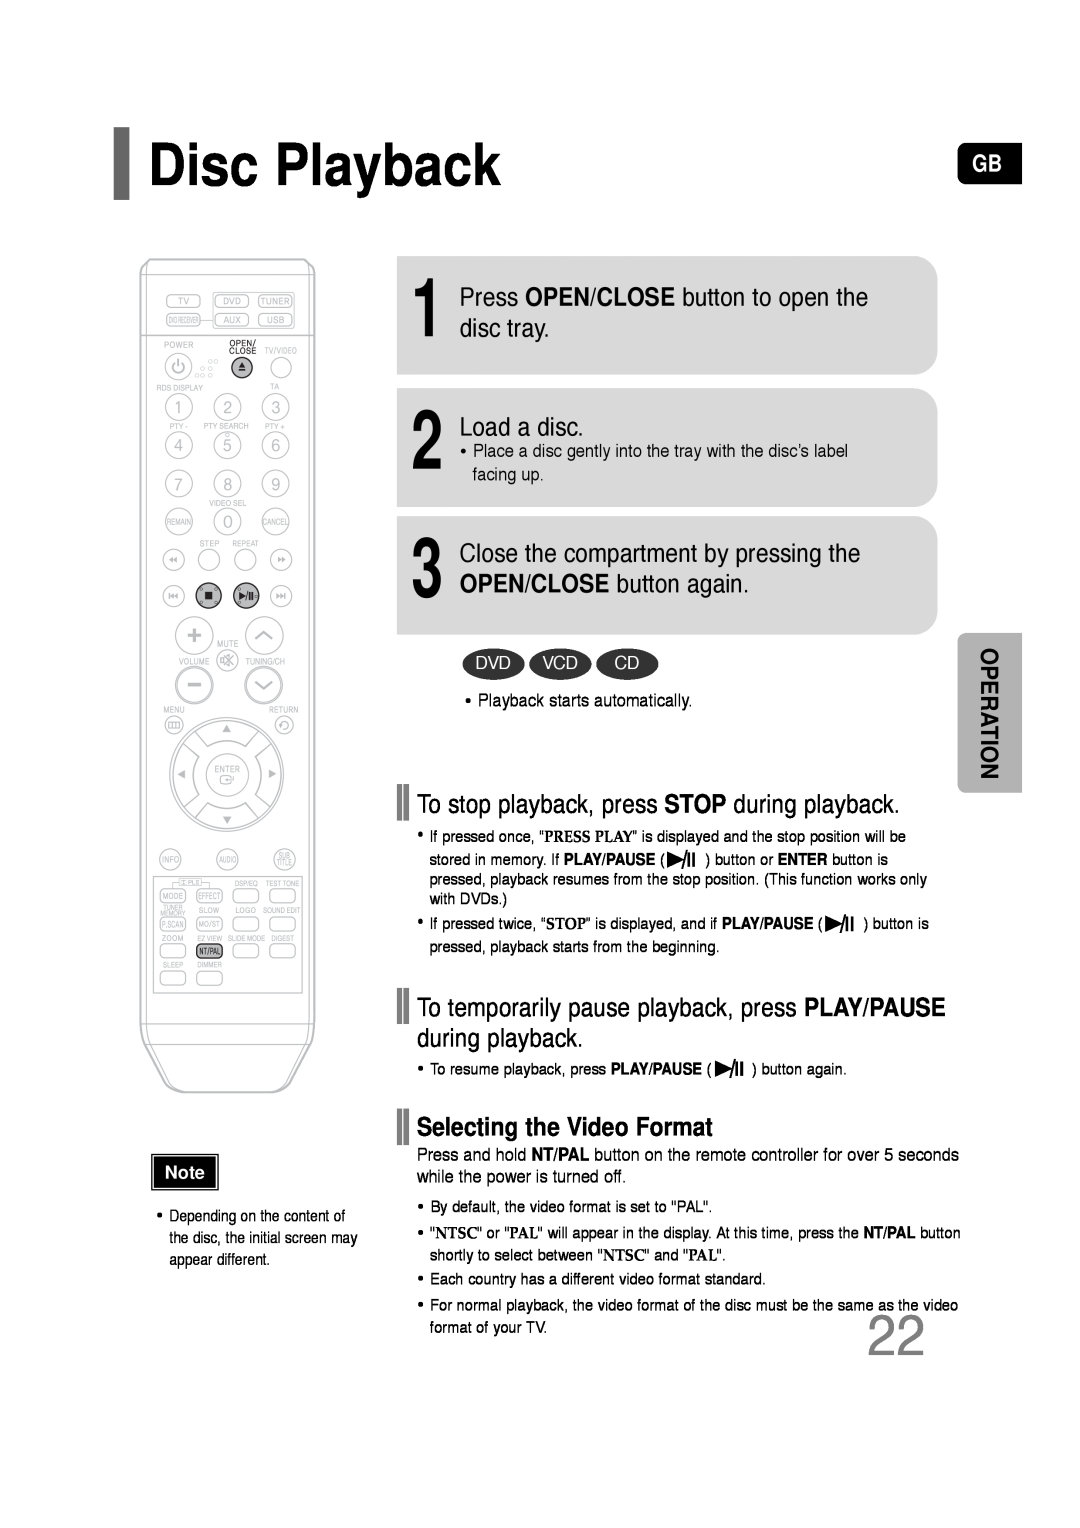 Samsung HT-TQ22 Disc Playback, Press OPEN/CLOSE button to open the disc tray, Load a disc, Selecting the Video Format 